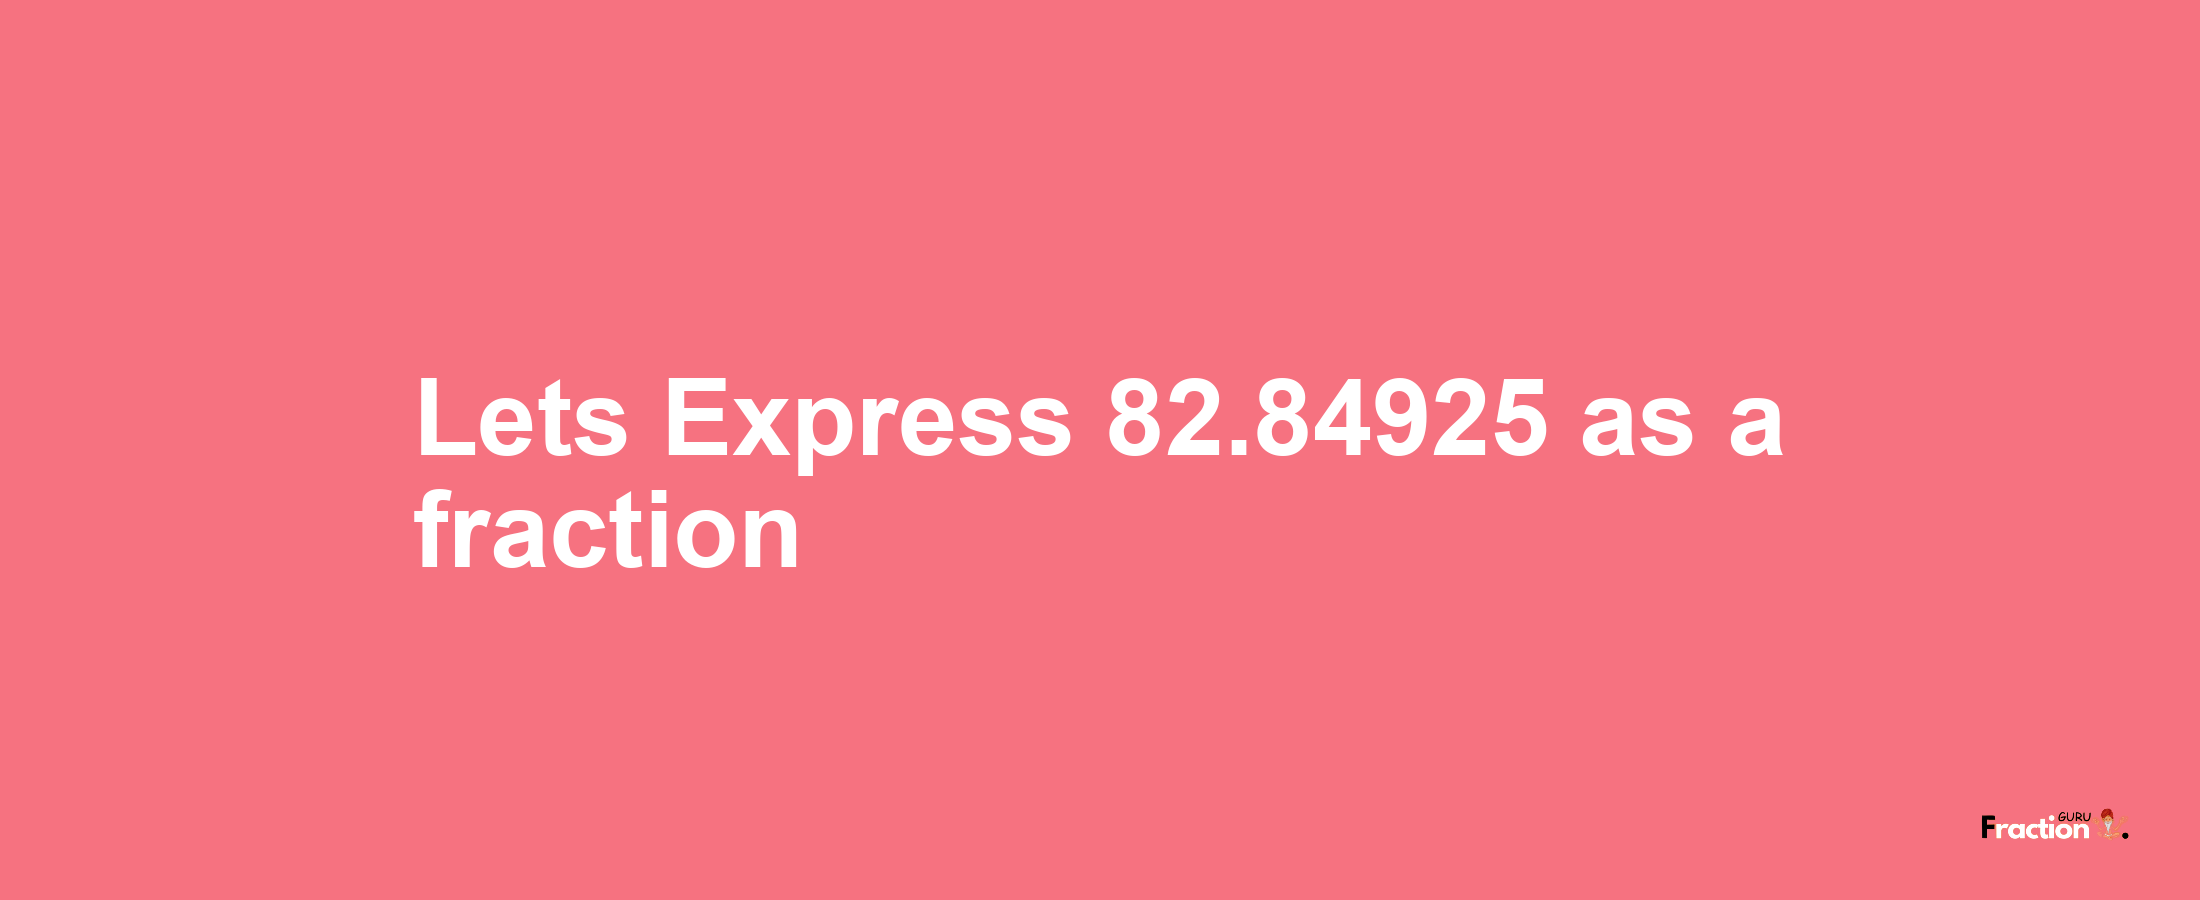 Lets Express 82.84925 as afraction